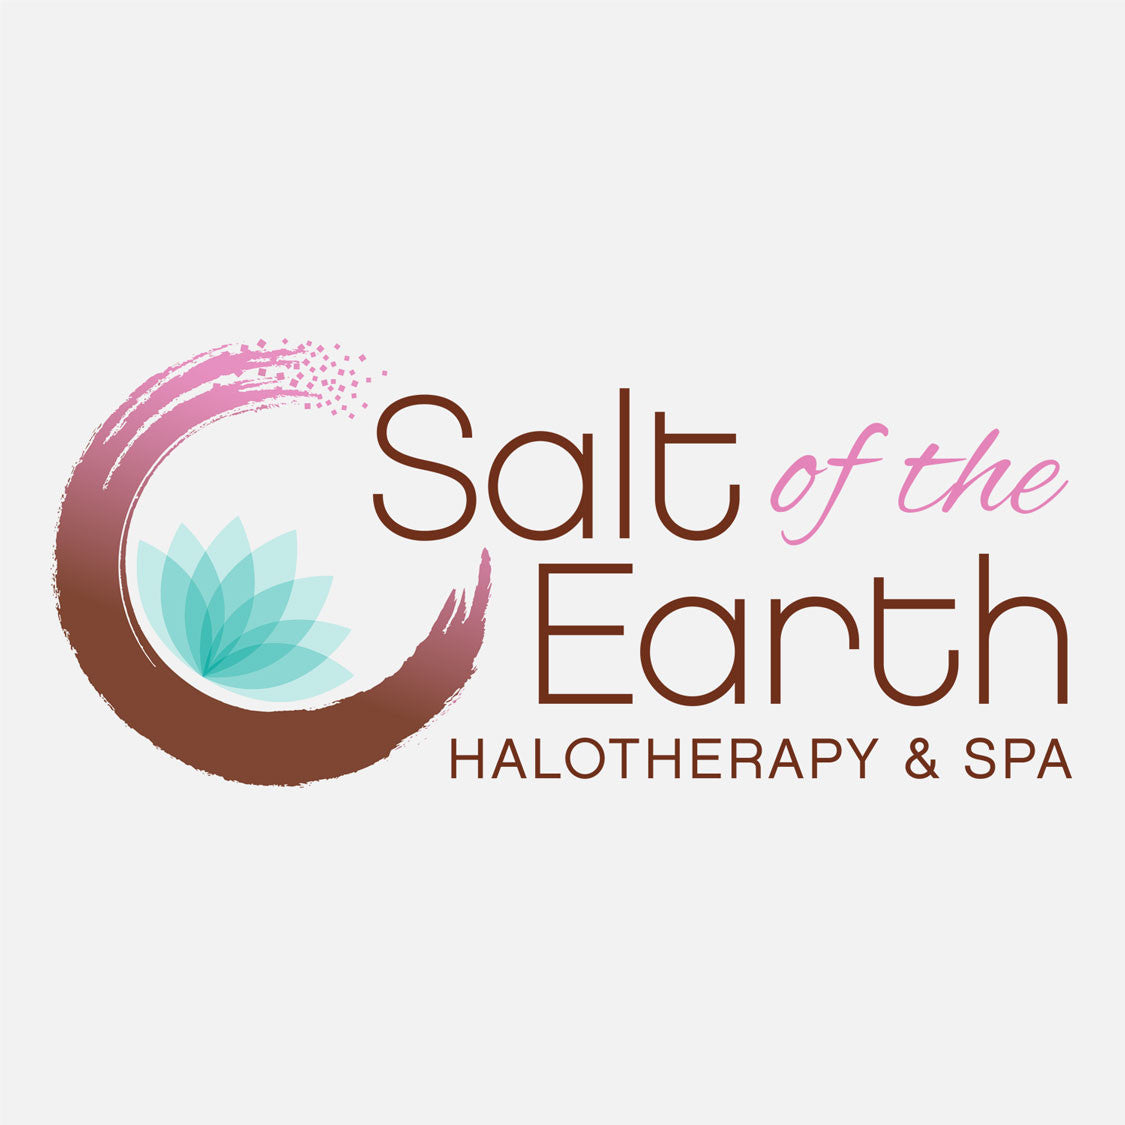 Salt of the Earth Spa and Halotherapy is an intimate wellness center, Jensen Beach, Florida. The logo is a graphic of a lotus within a loose circle.